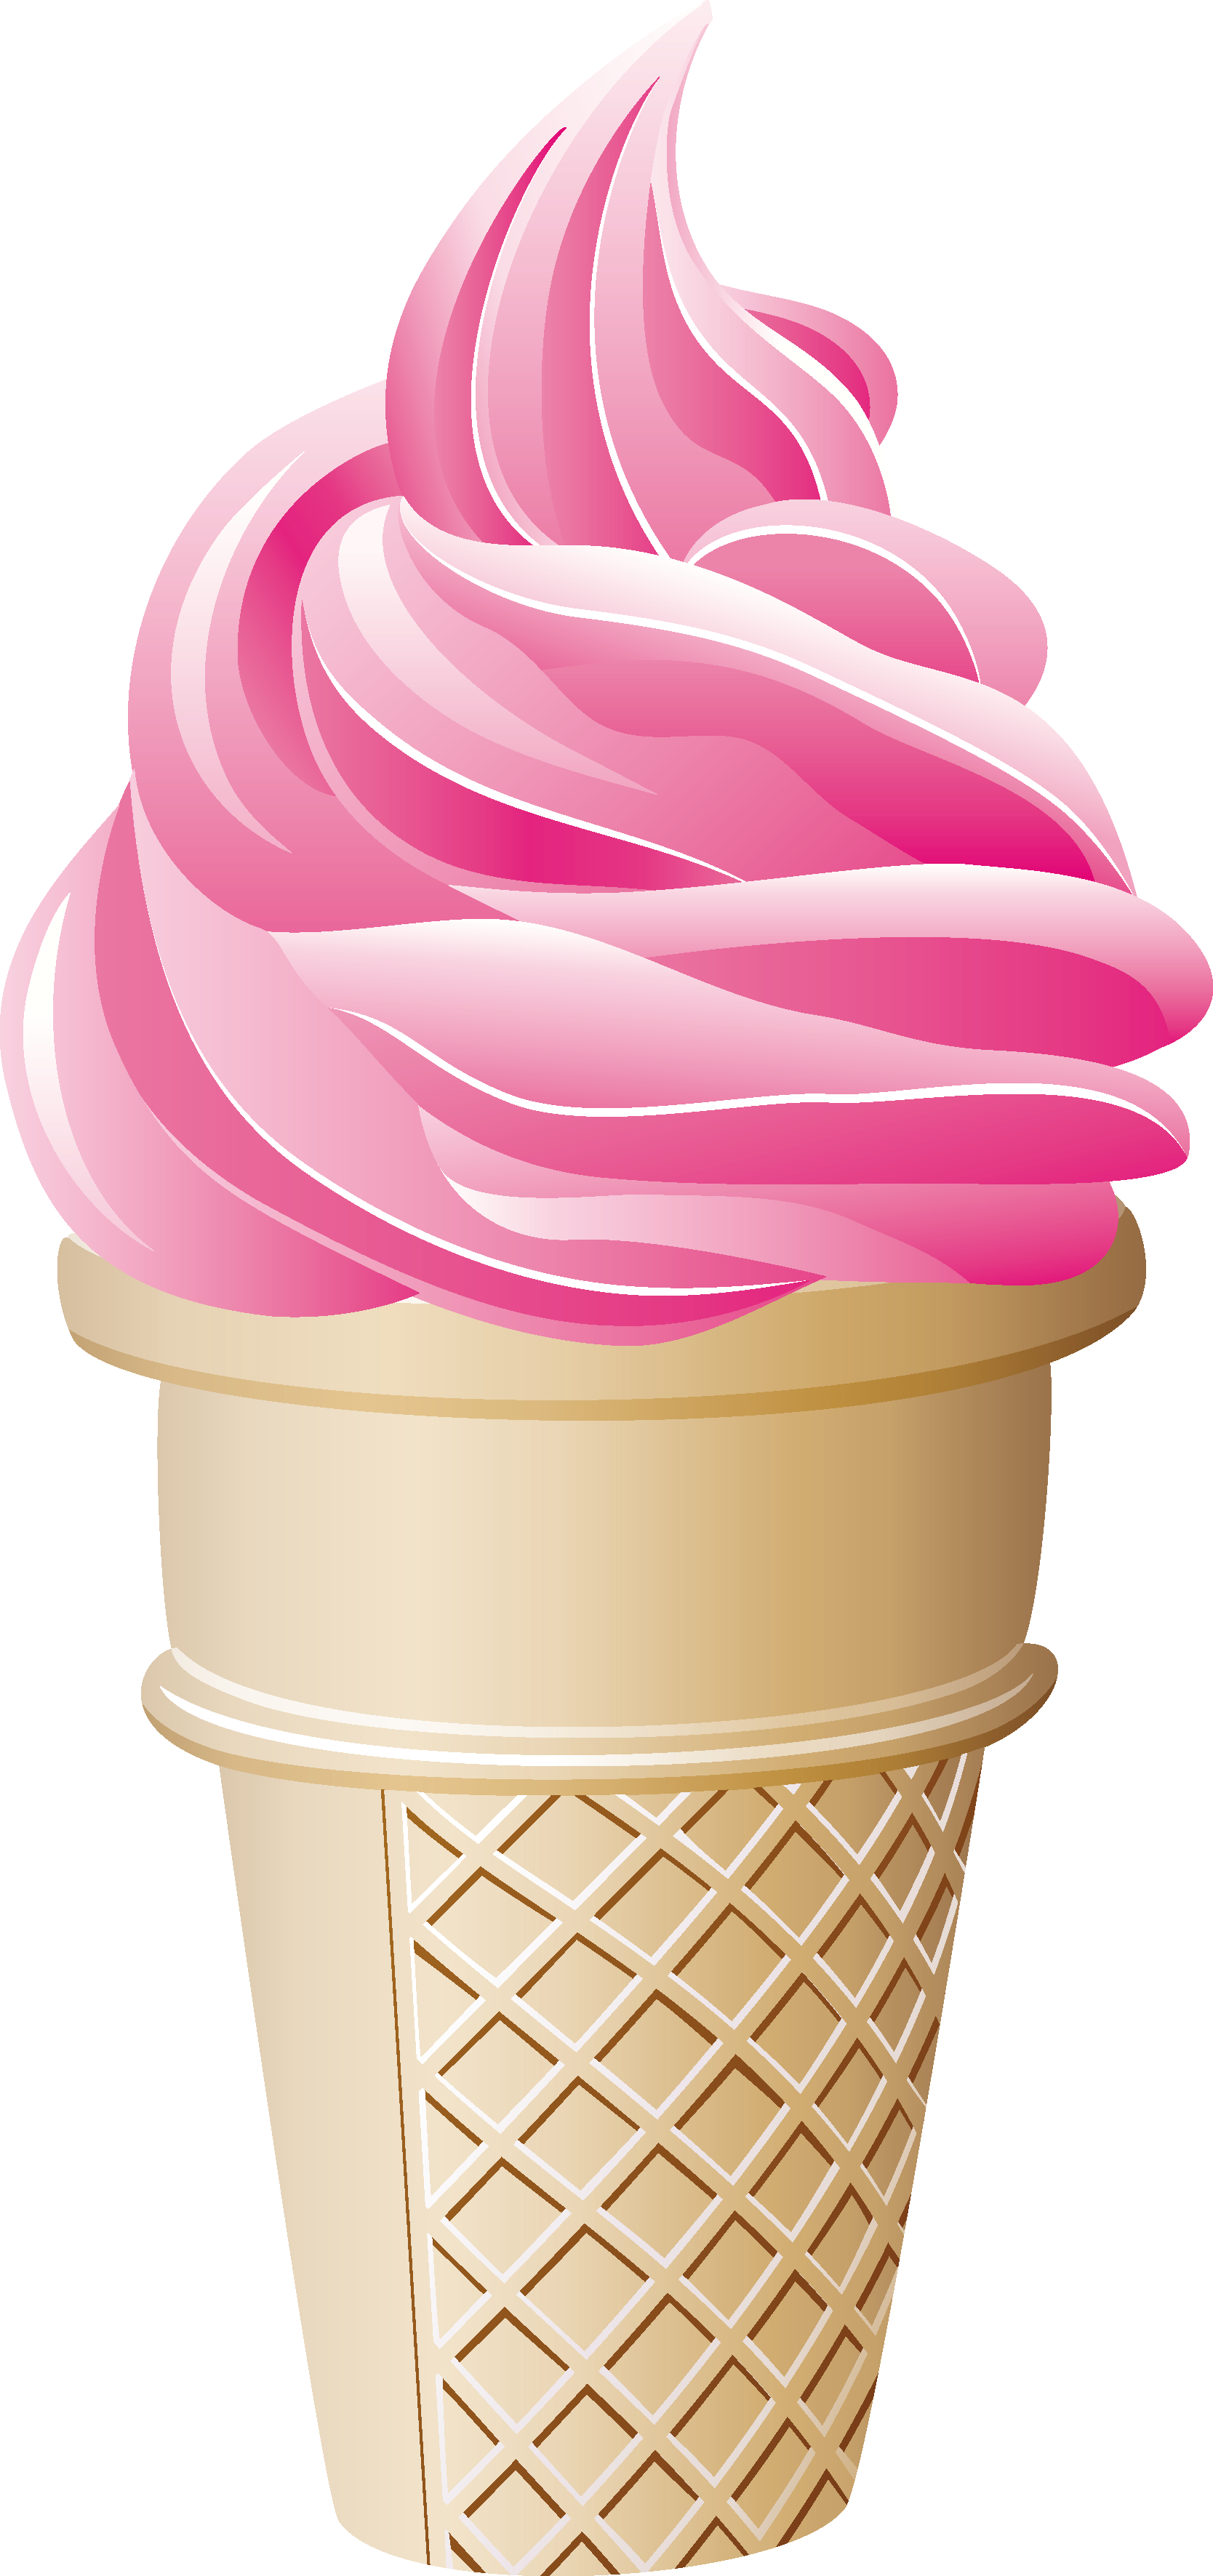 free clipart ice cream cup - photo #14